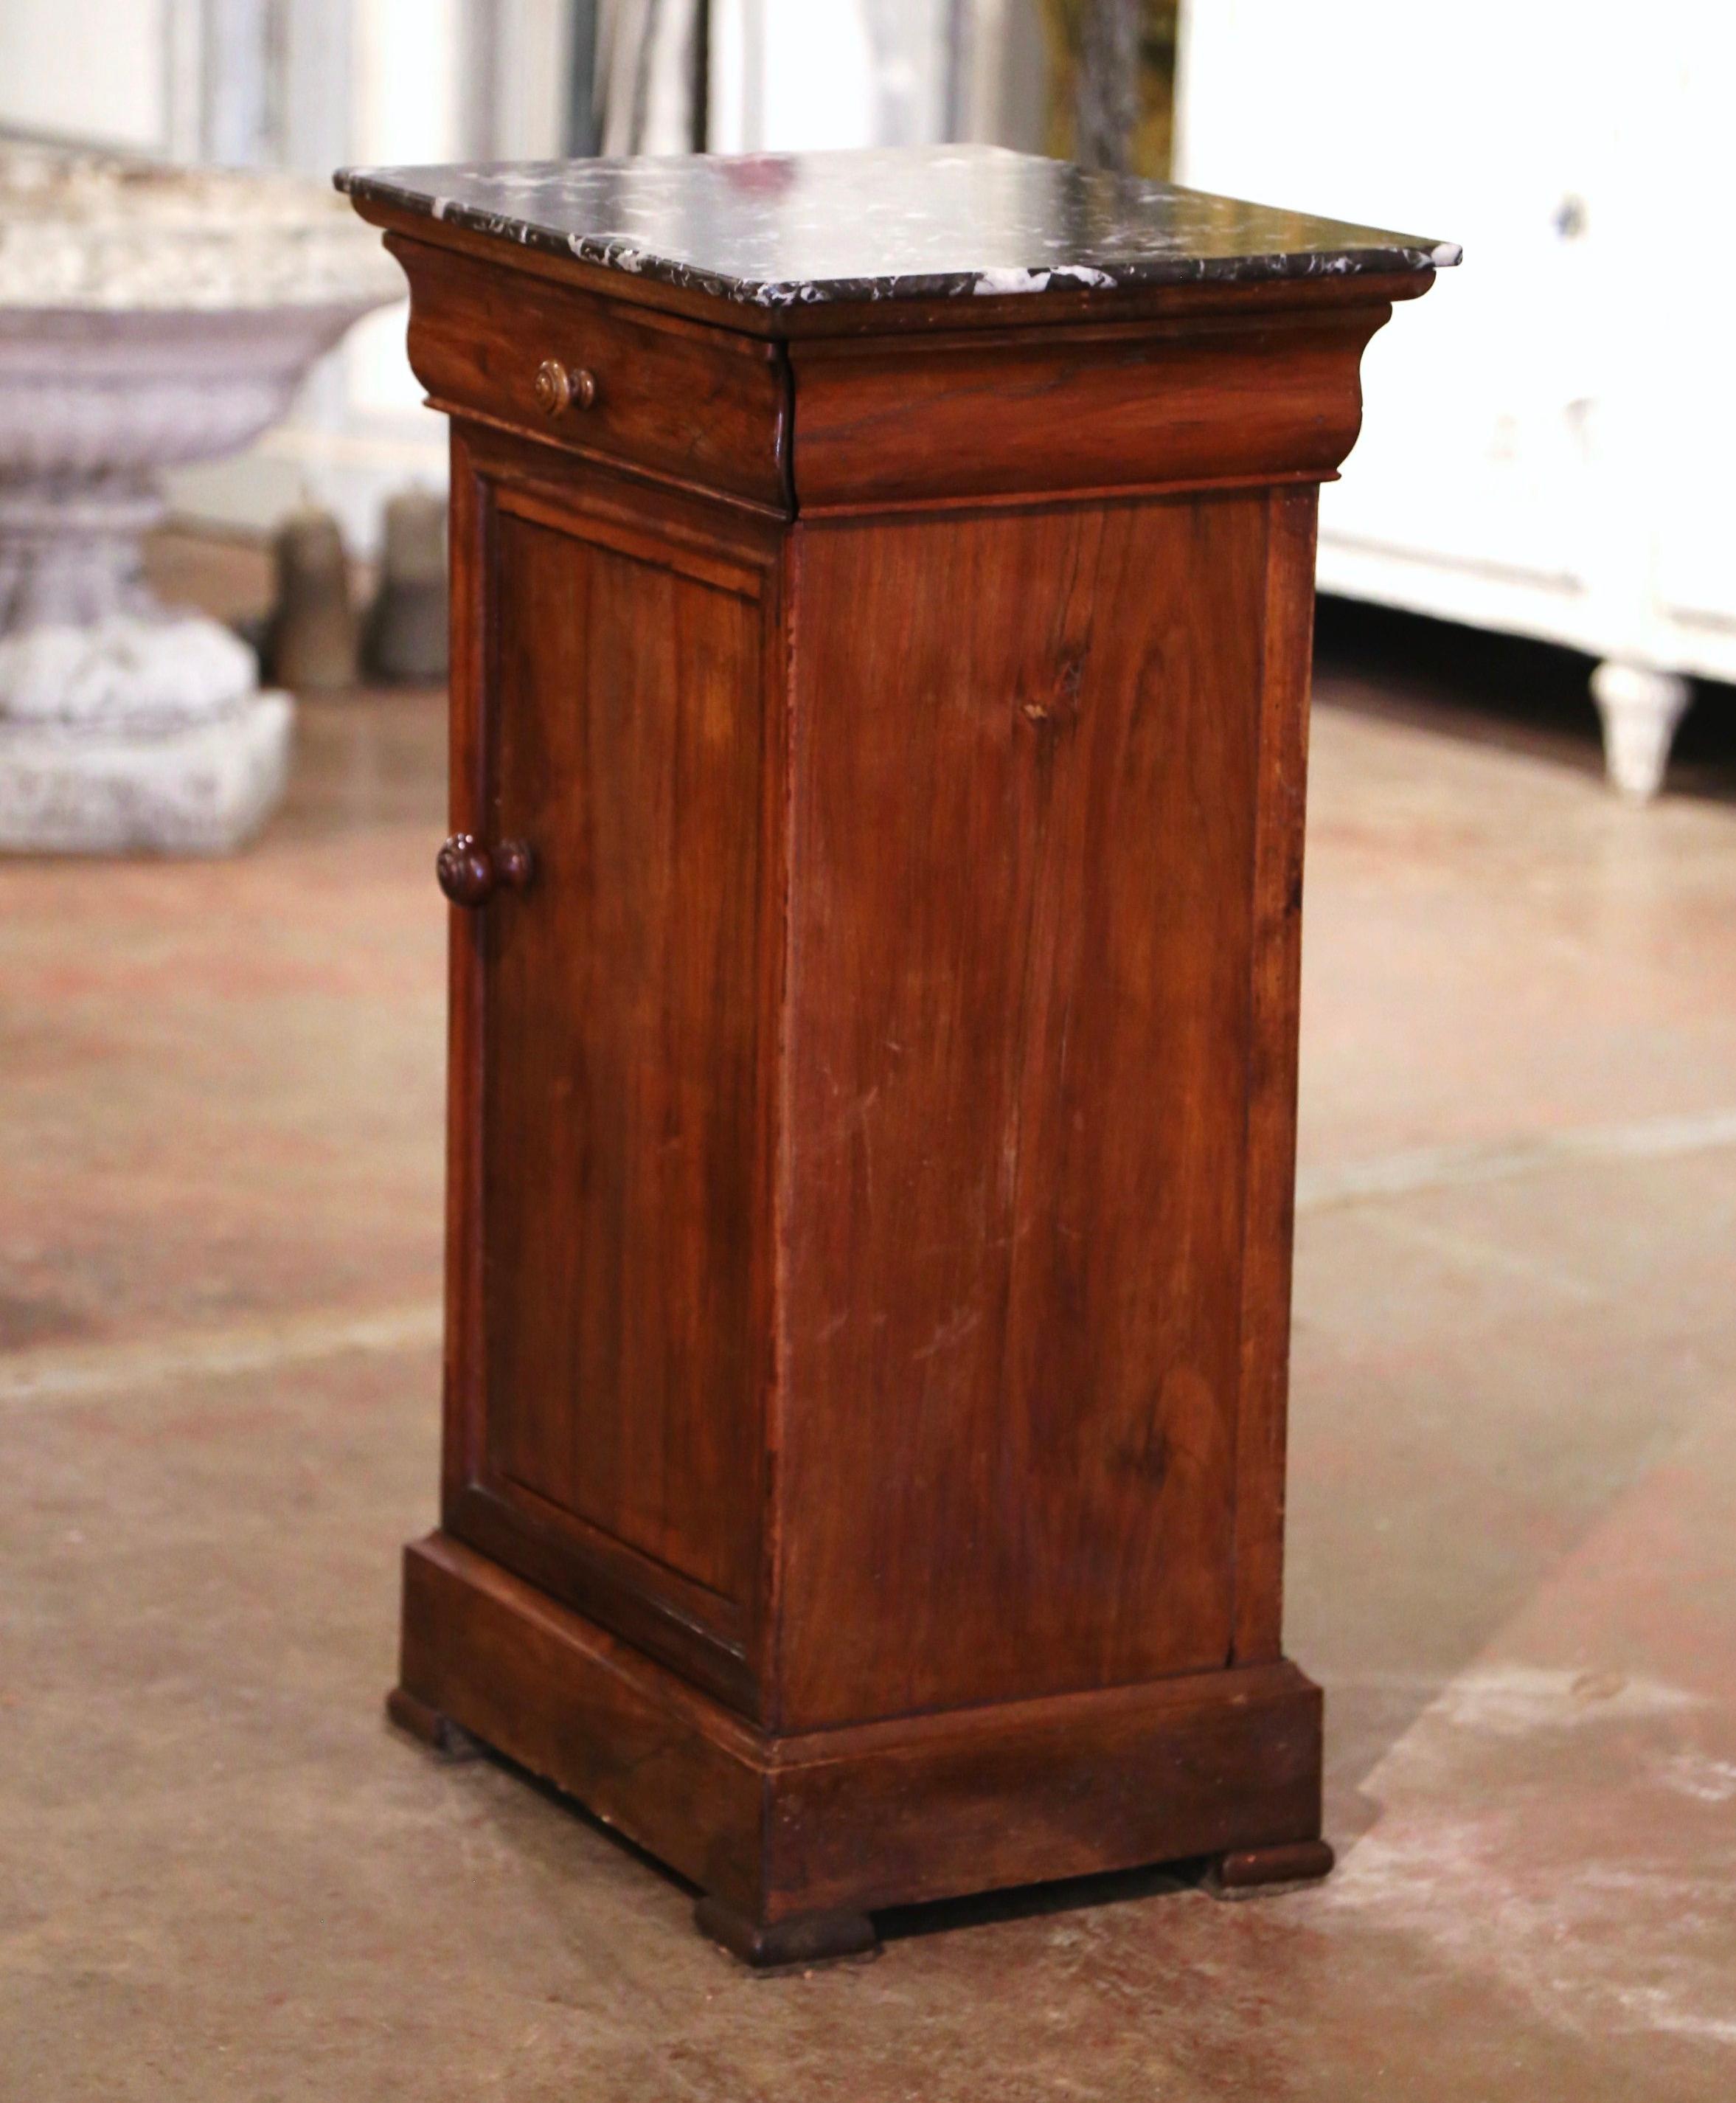 This elegant antique nightstand was crafted in France, circa 1890. The traditional fruit wood cabinet sits on bracket feet over a wide bottom plinth; it is fitted with a single drawer dressed with a wooden knob, over a front door also dressed with a